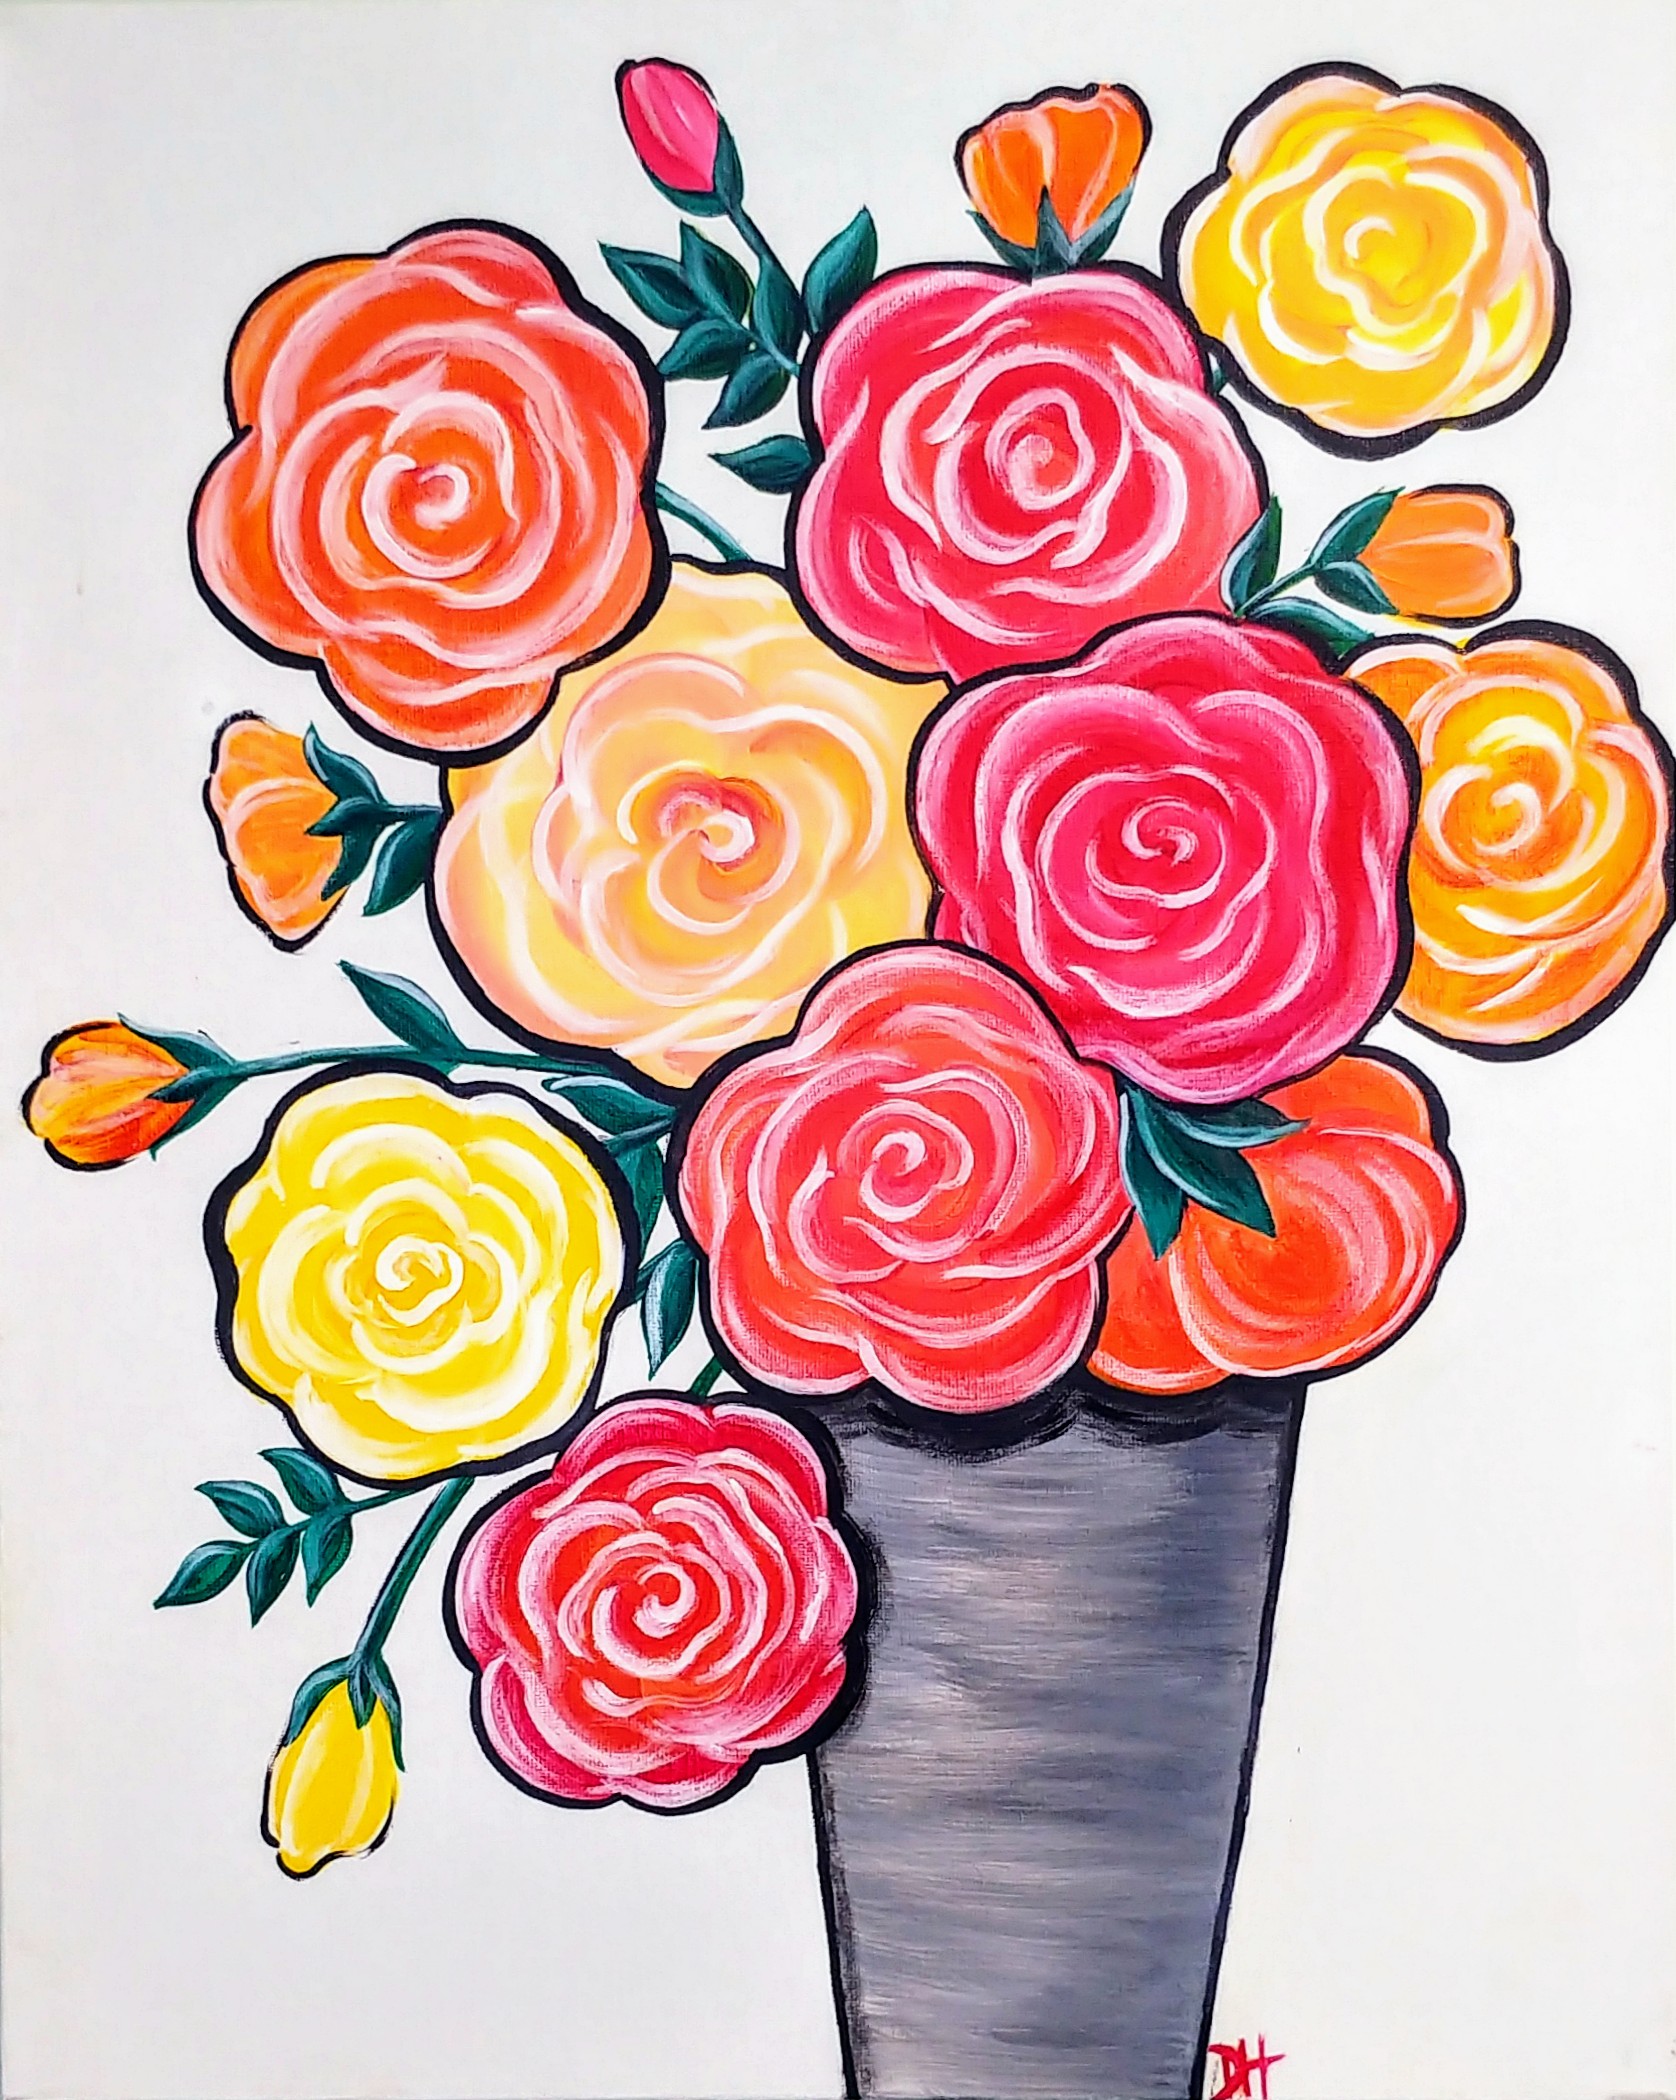 A Pop Art Roses experience project by Yaymaker